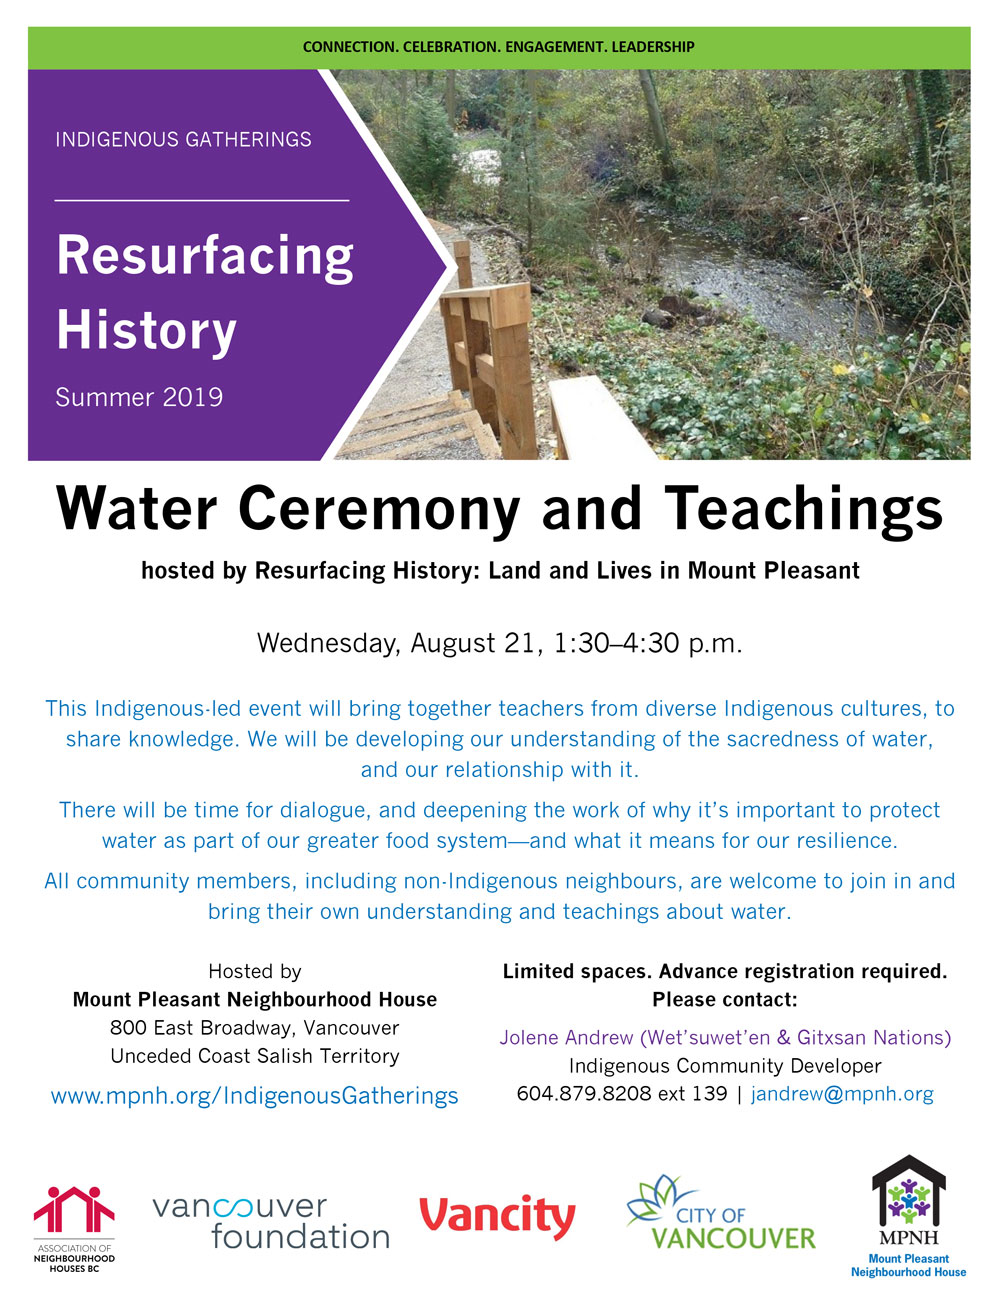 An image of the poster with event details, featuring an image of water flowing through Renfrew Ravine